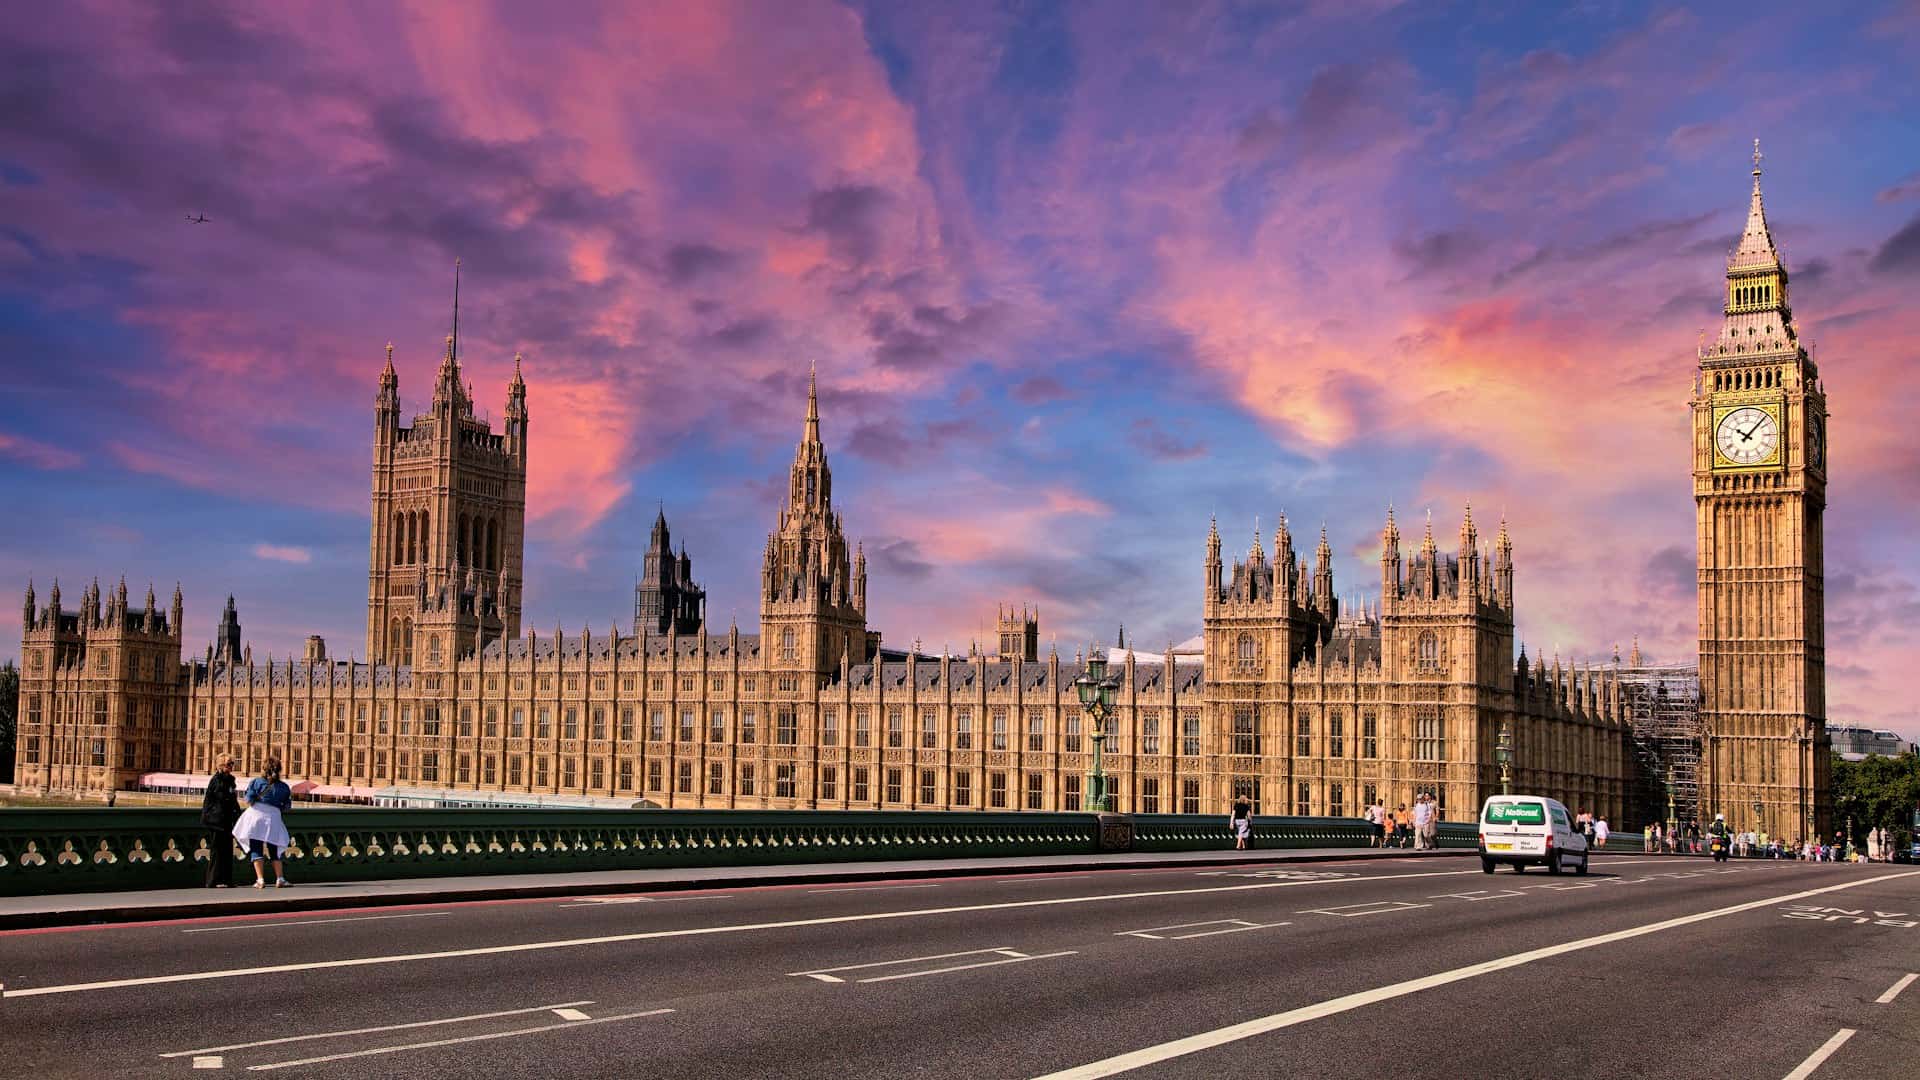 Parliament from westminster bridge with pink sunset in the background